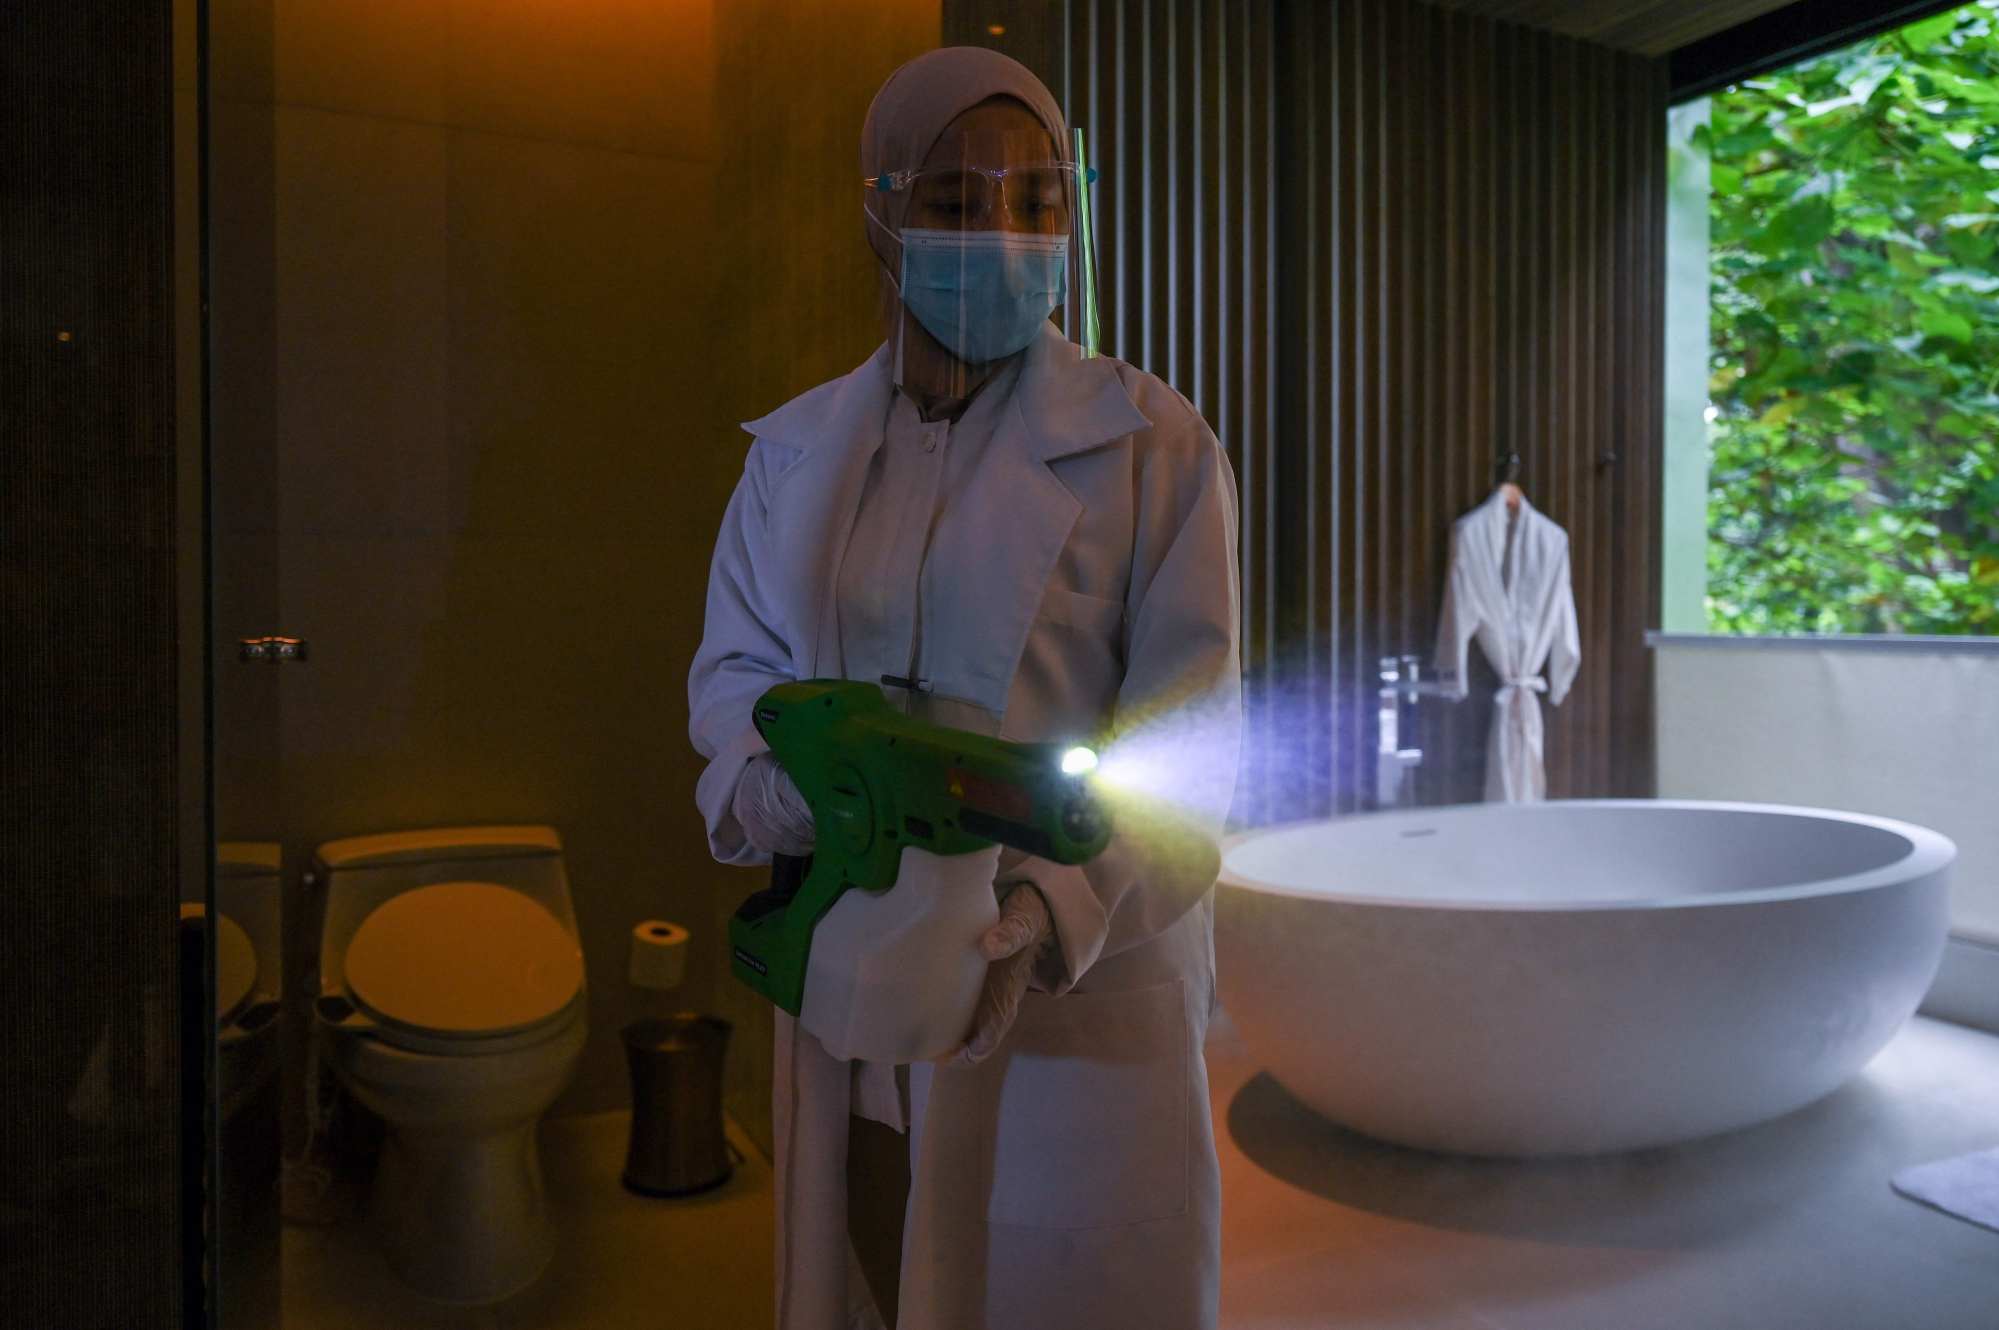 A housekeeping worker sanitises a bathroom at the Ritz-Carlton hotel, in Langkawi. Photo: AFP